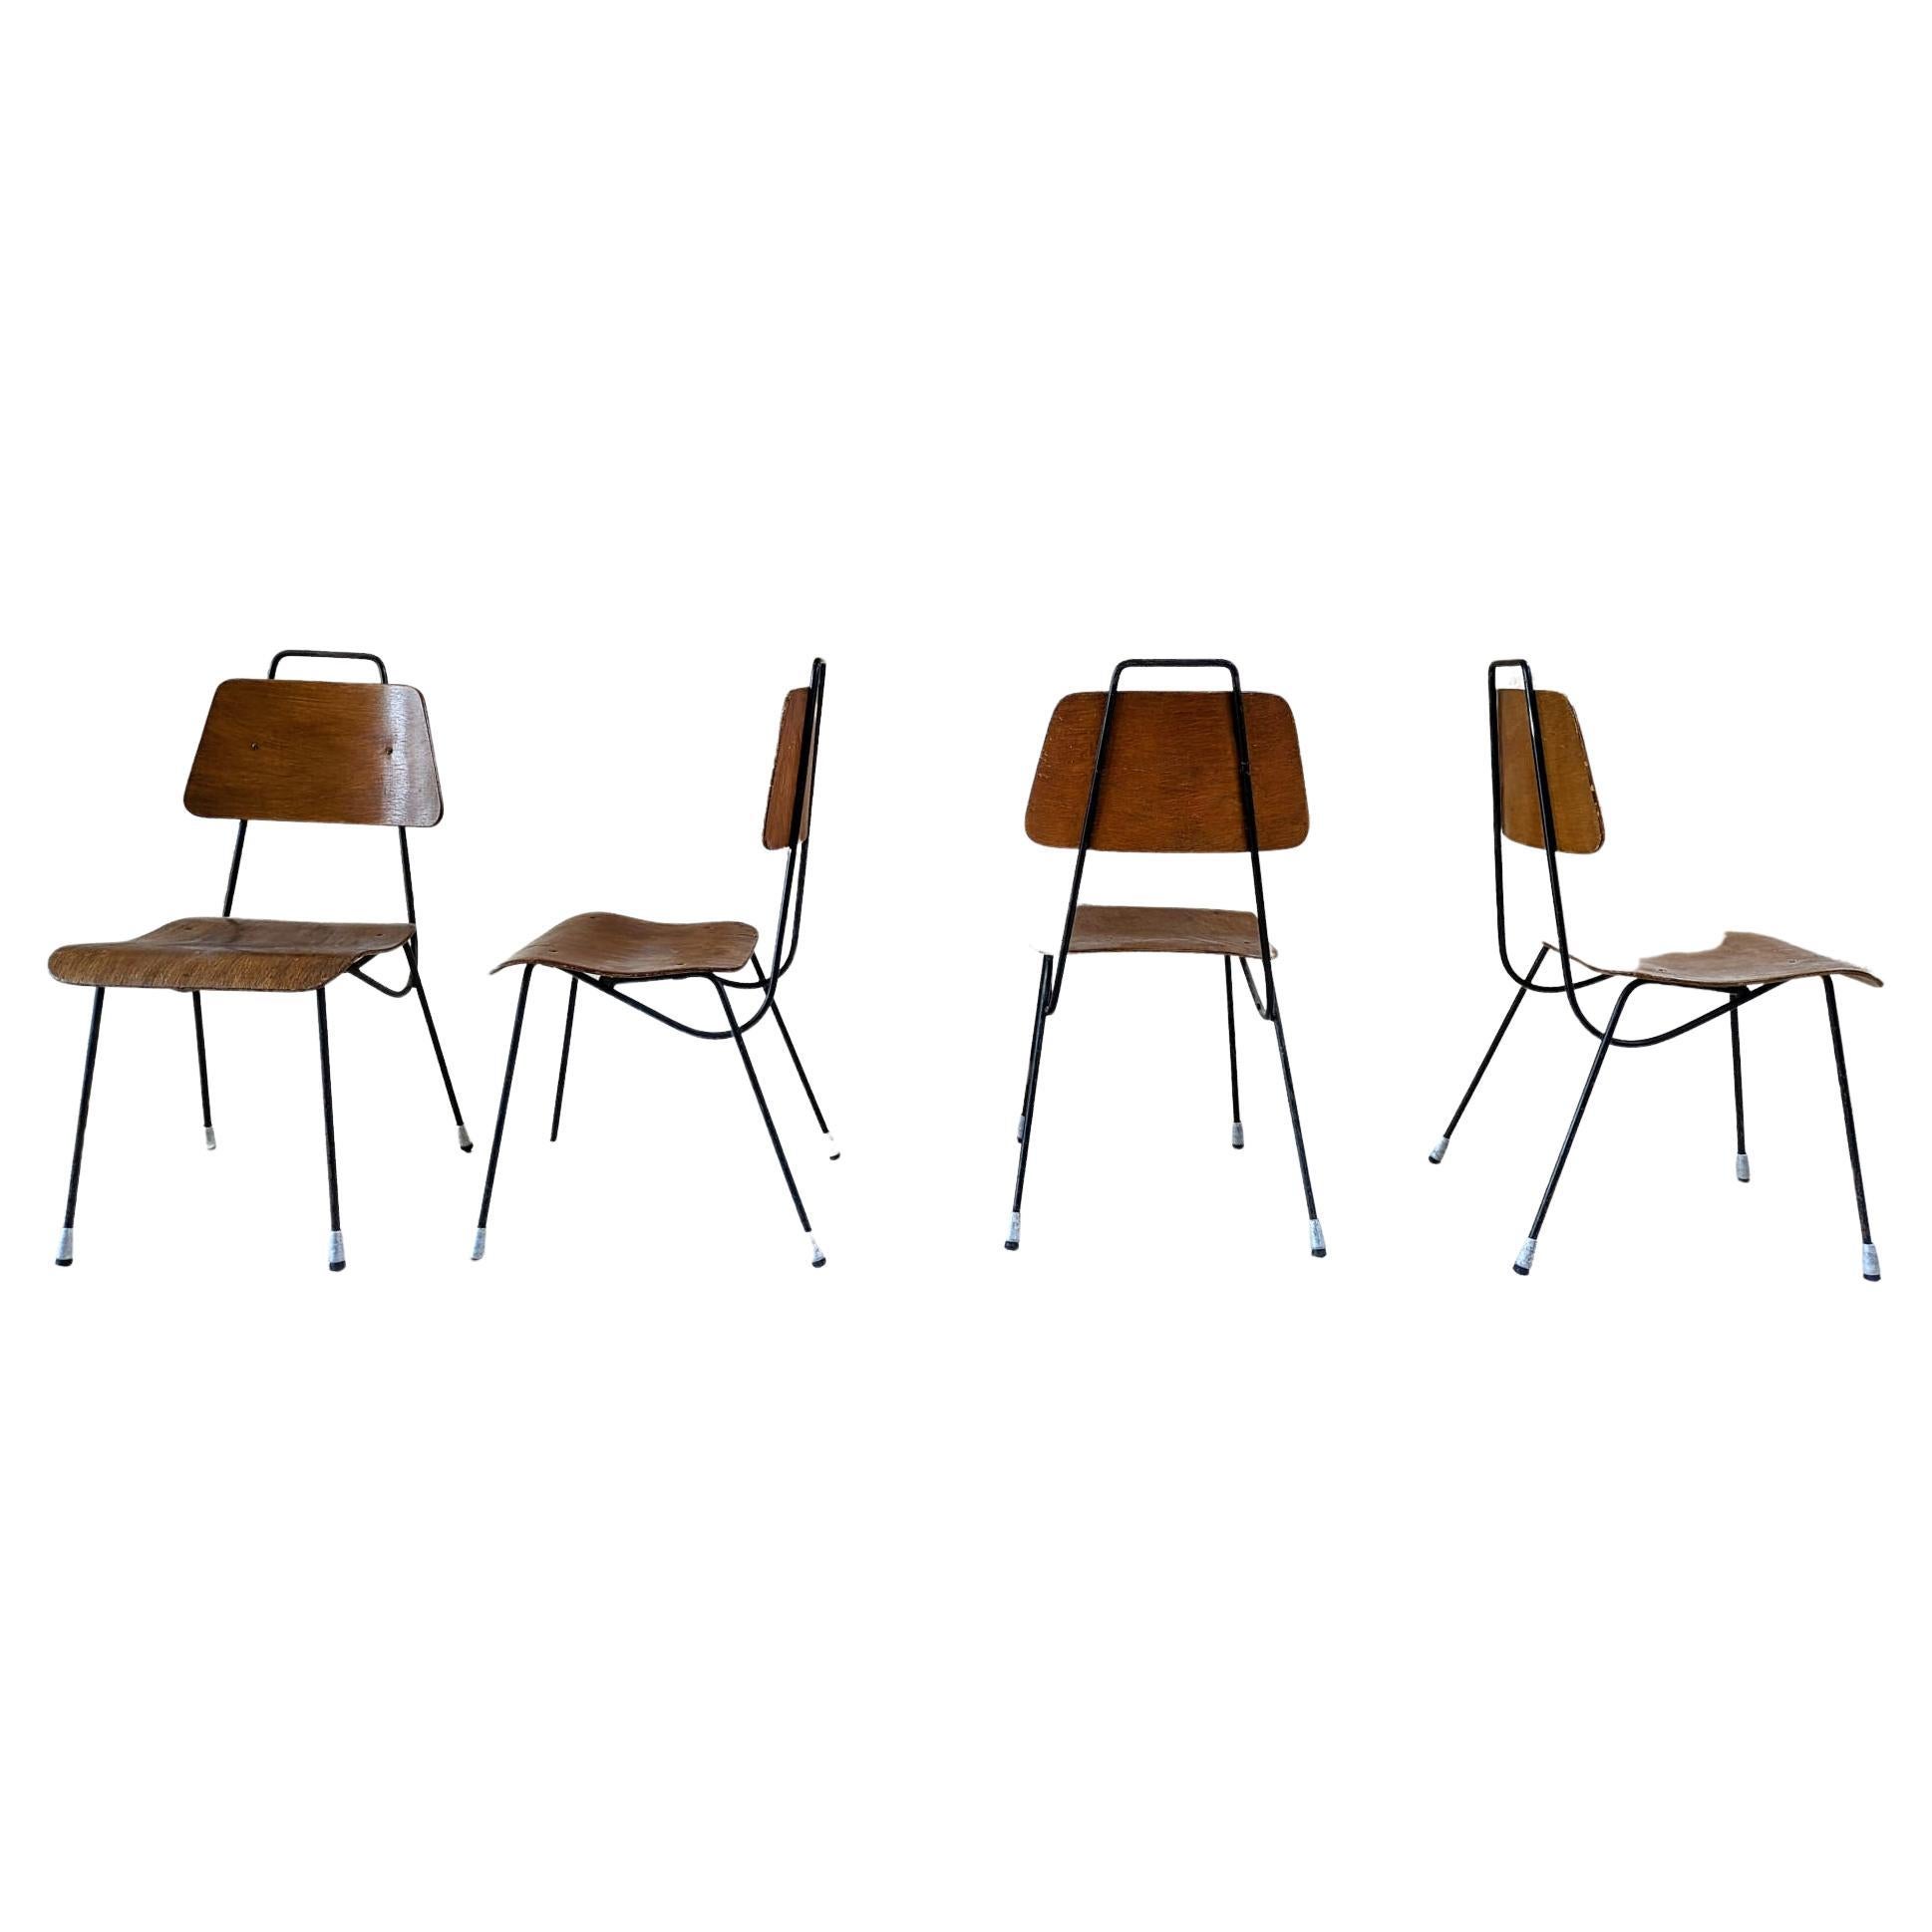 Set of 4 Chairs by Antoni De Moragas 1950s For Sale